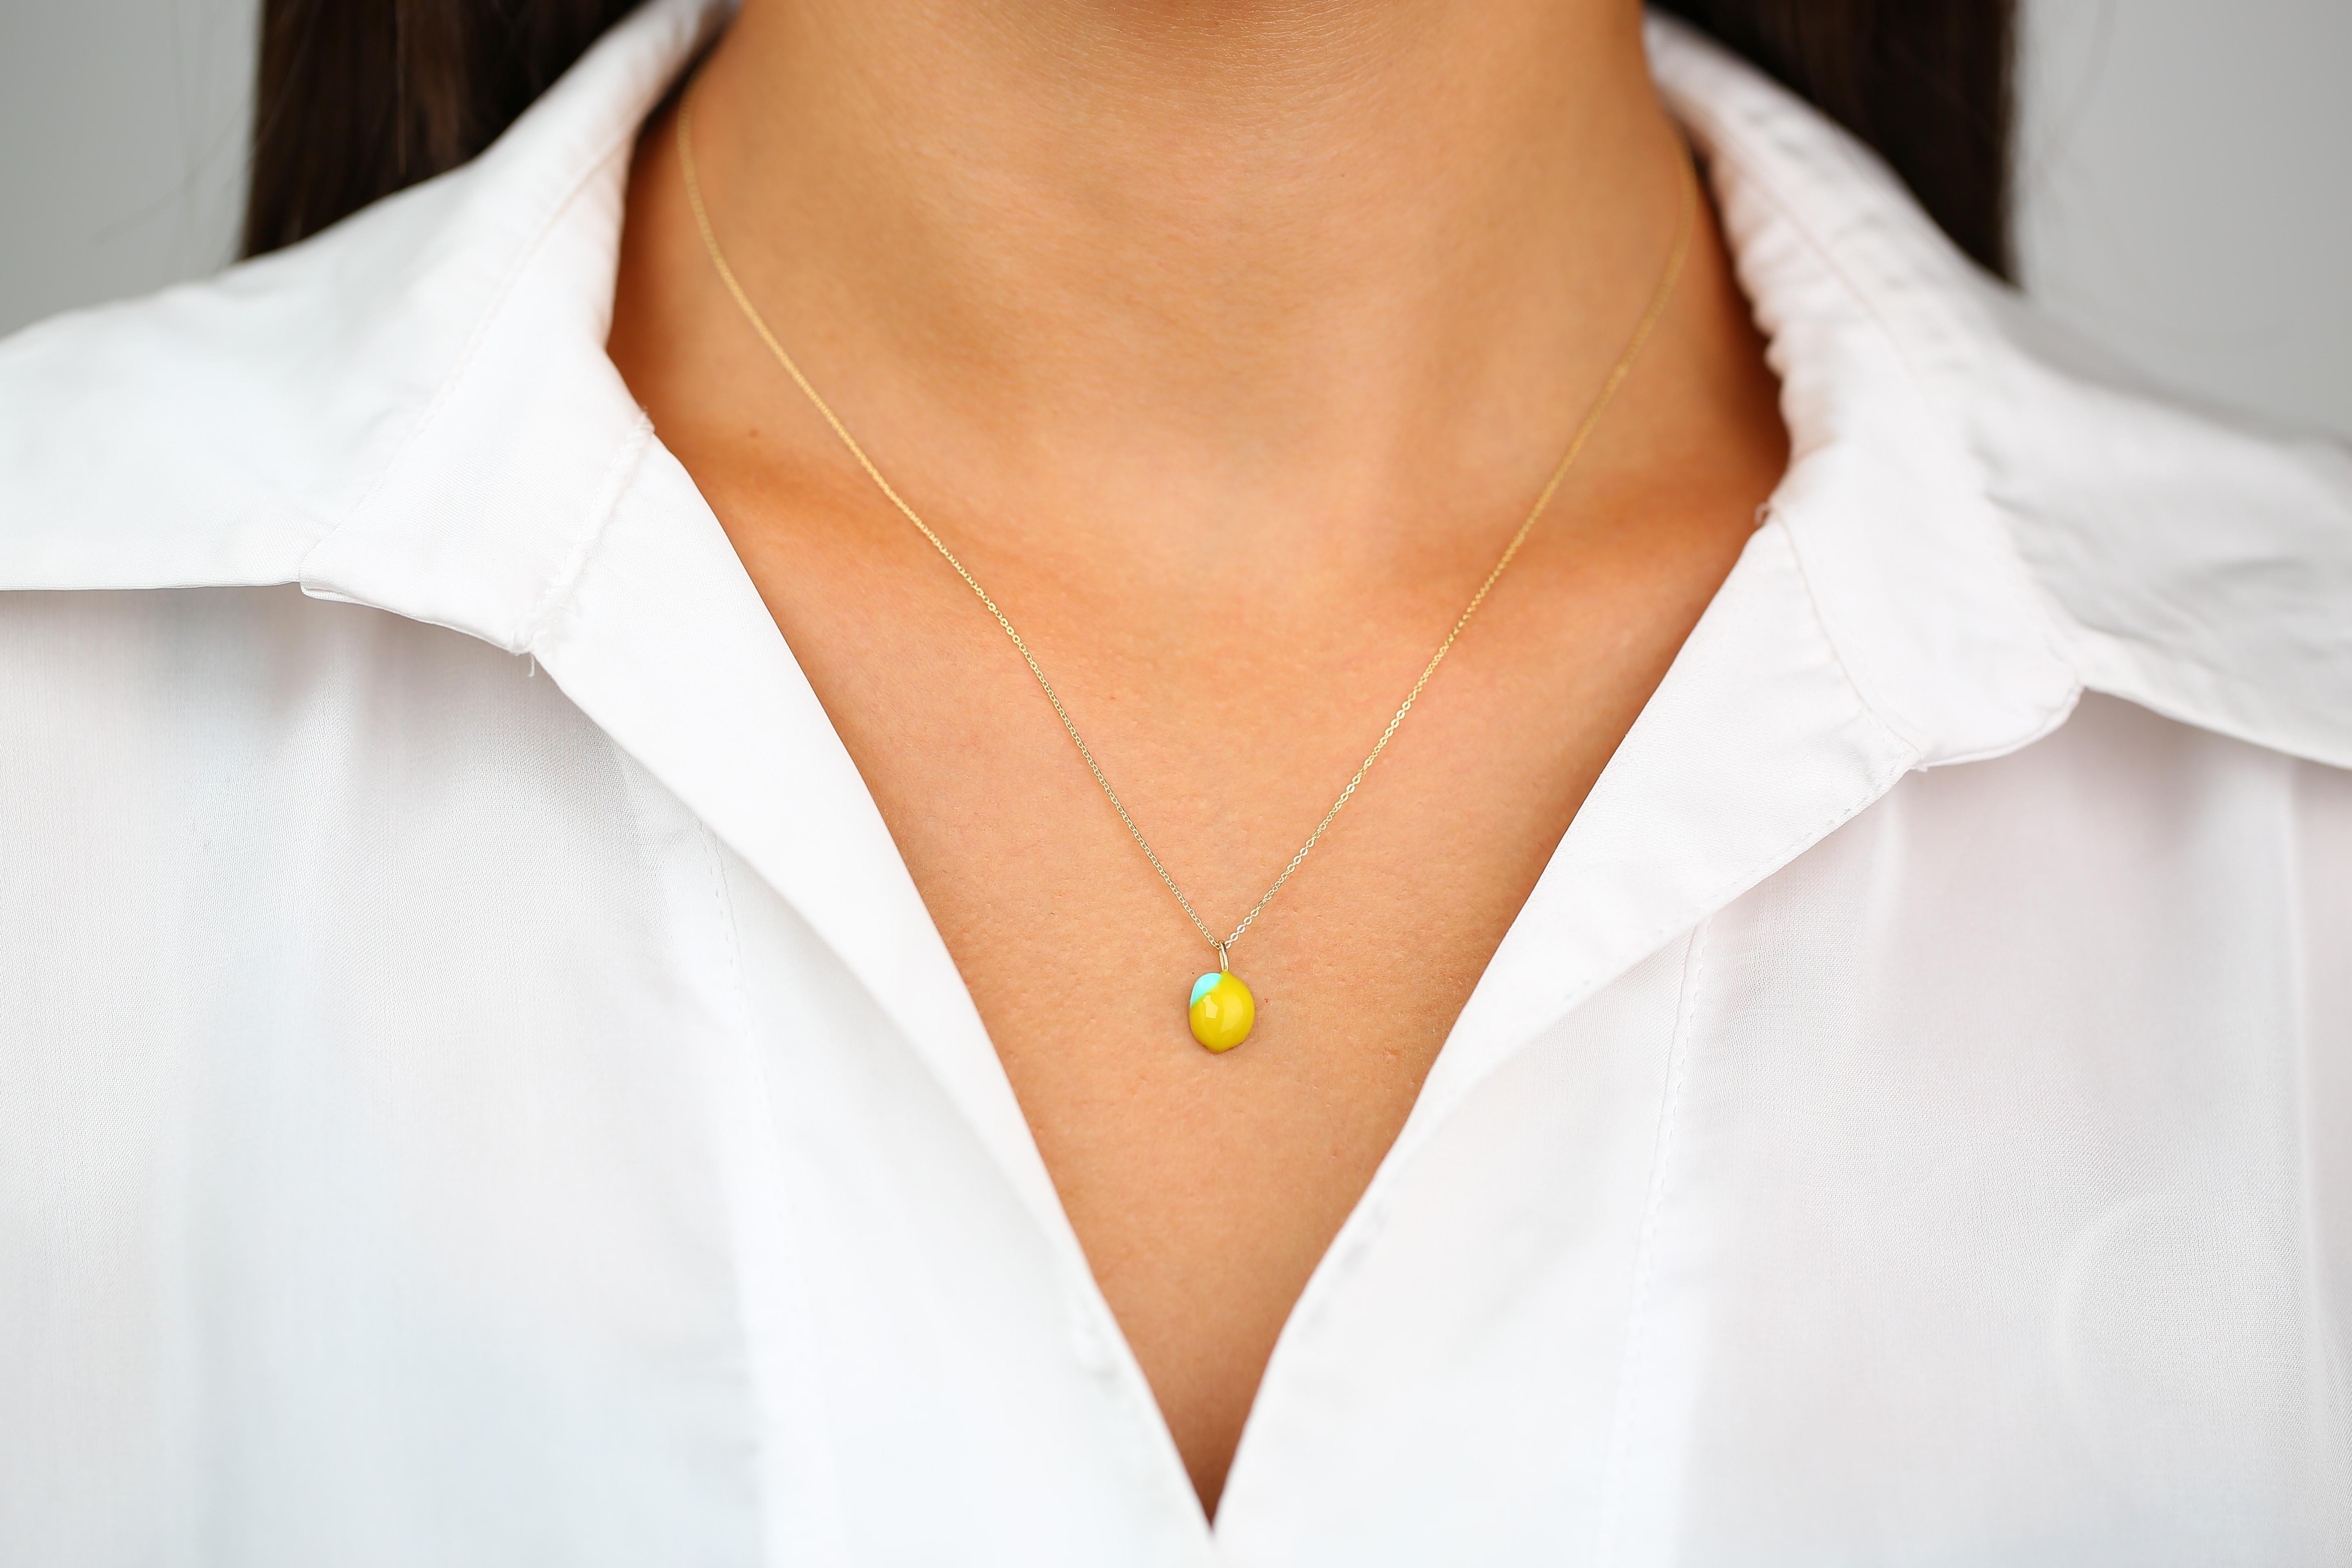 14K Gold Lemon Necklace - Enamel Fruit Necklace

Special desing necklace with enamel. It’s a manual labour product. ‘Handmade’. Fashionable product. 

This necklace was made with quality materials and excellent handwork. I guarantee  the quality